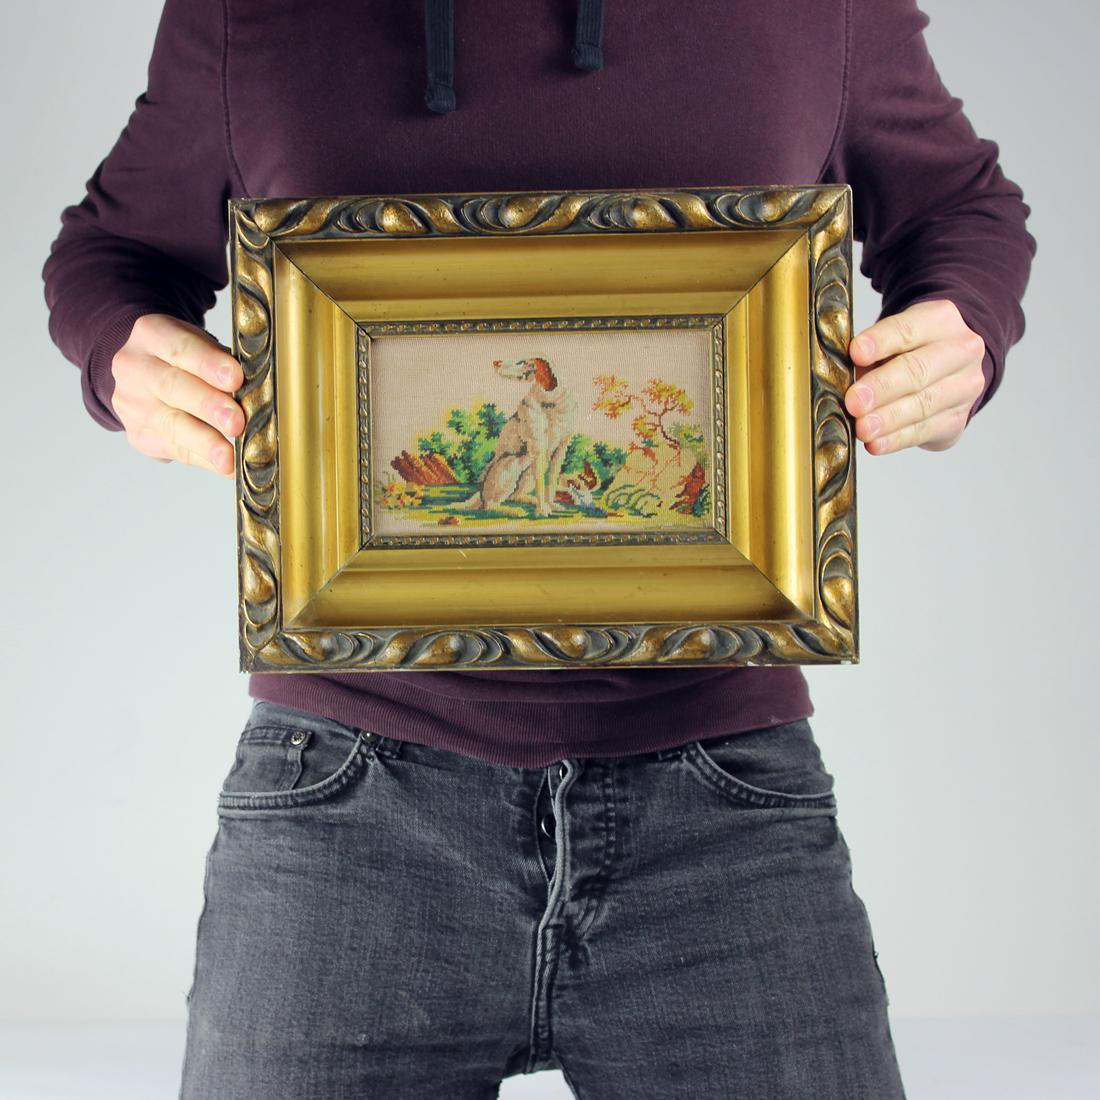 1920s Tapestry In Frame, Czechoslovakia For Sale 5